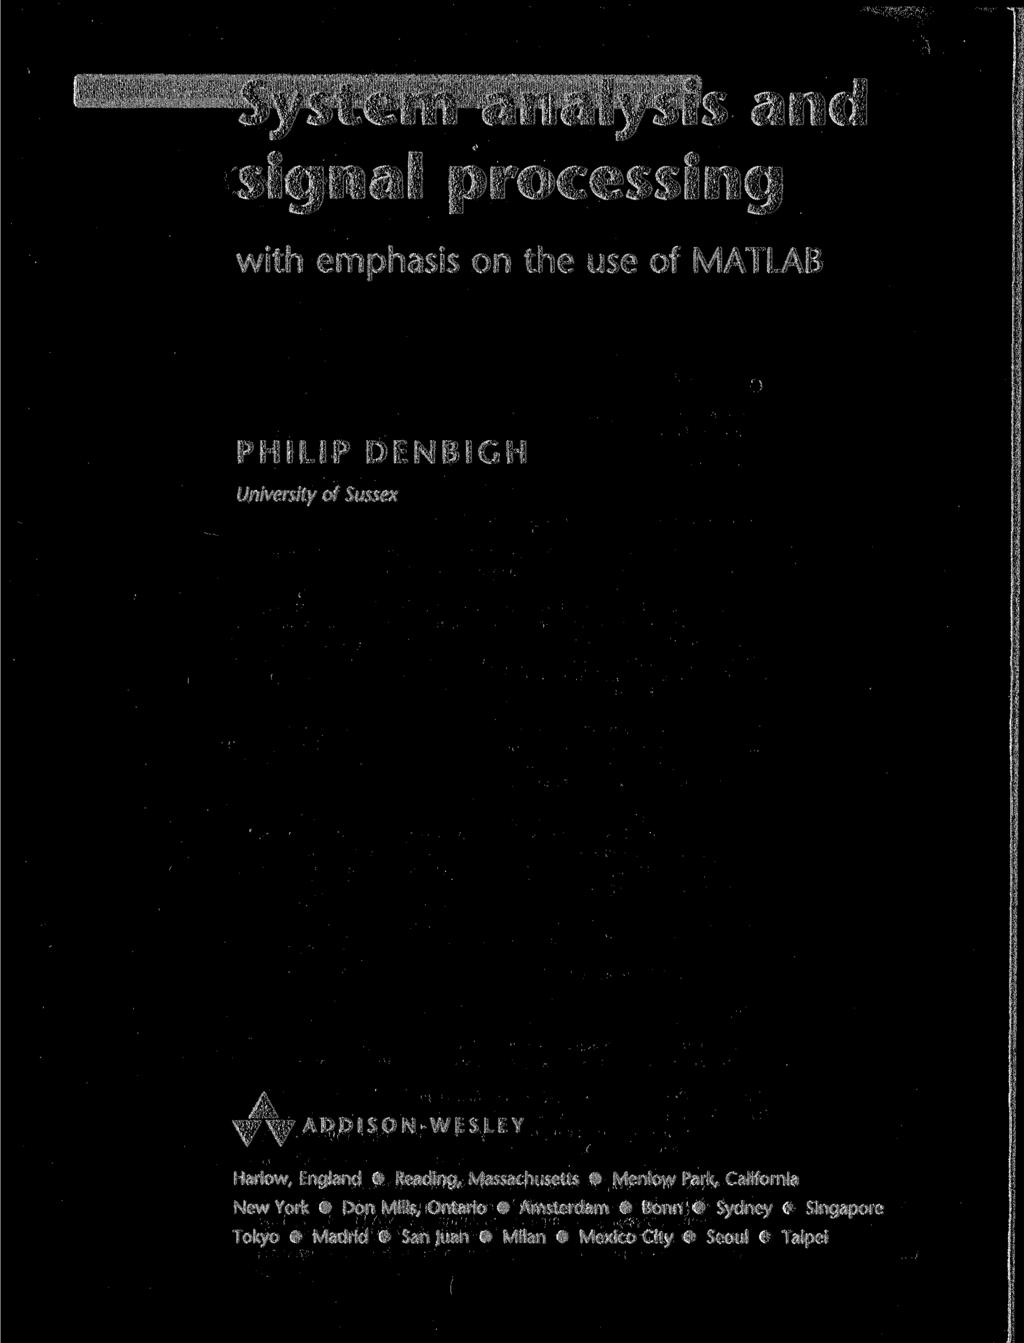 System analysis and signal processing with emphasis on the use of MATLAB PHILIP DENBIGH University of Sussex ADDISON-WESLEY Harlow, England Reading,